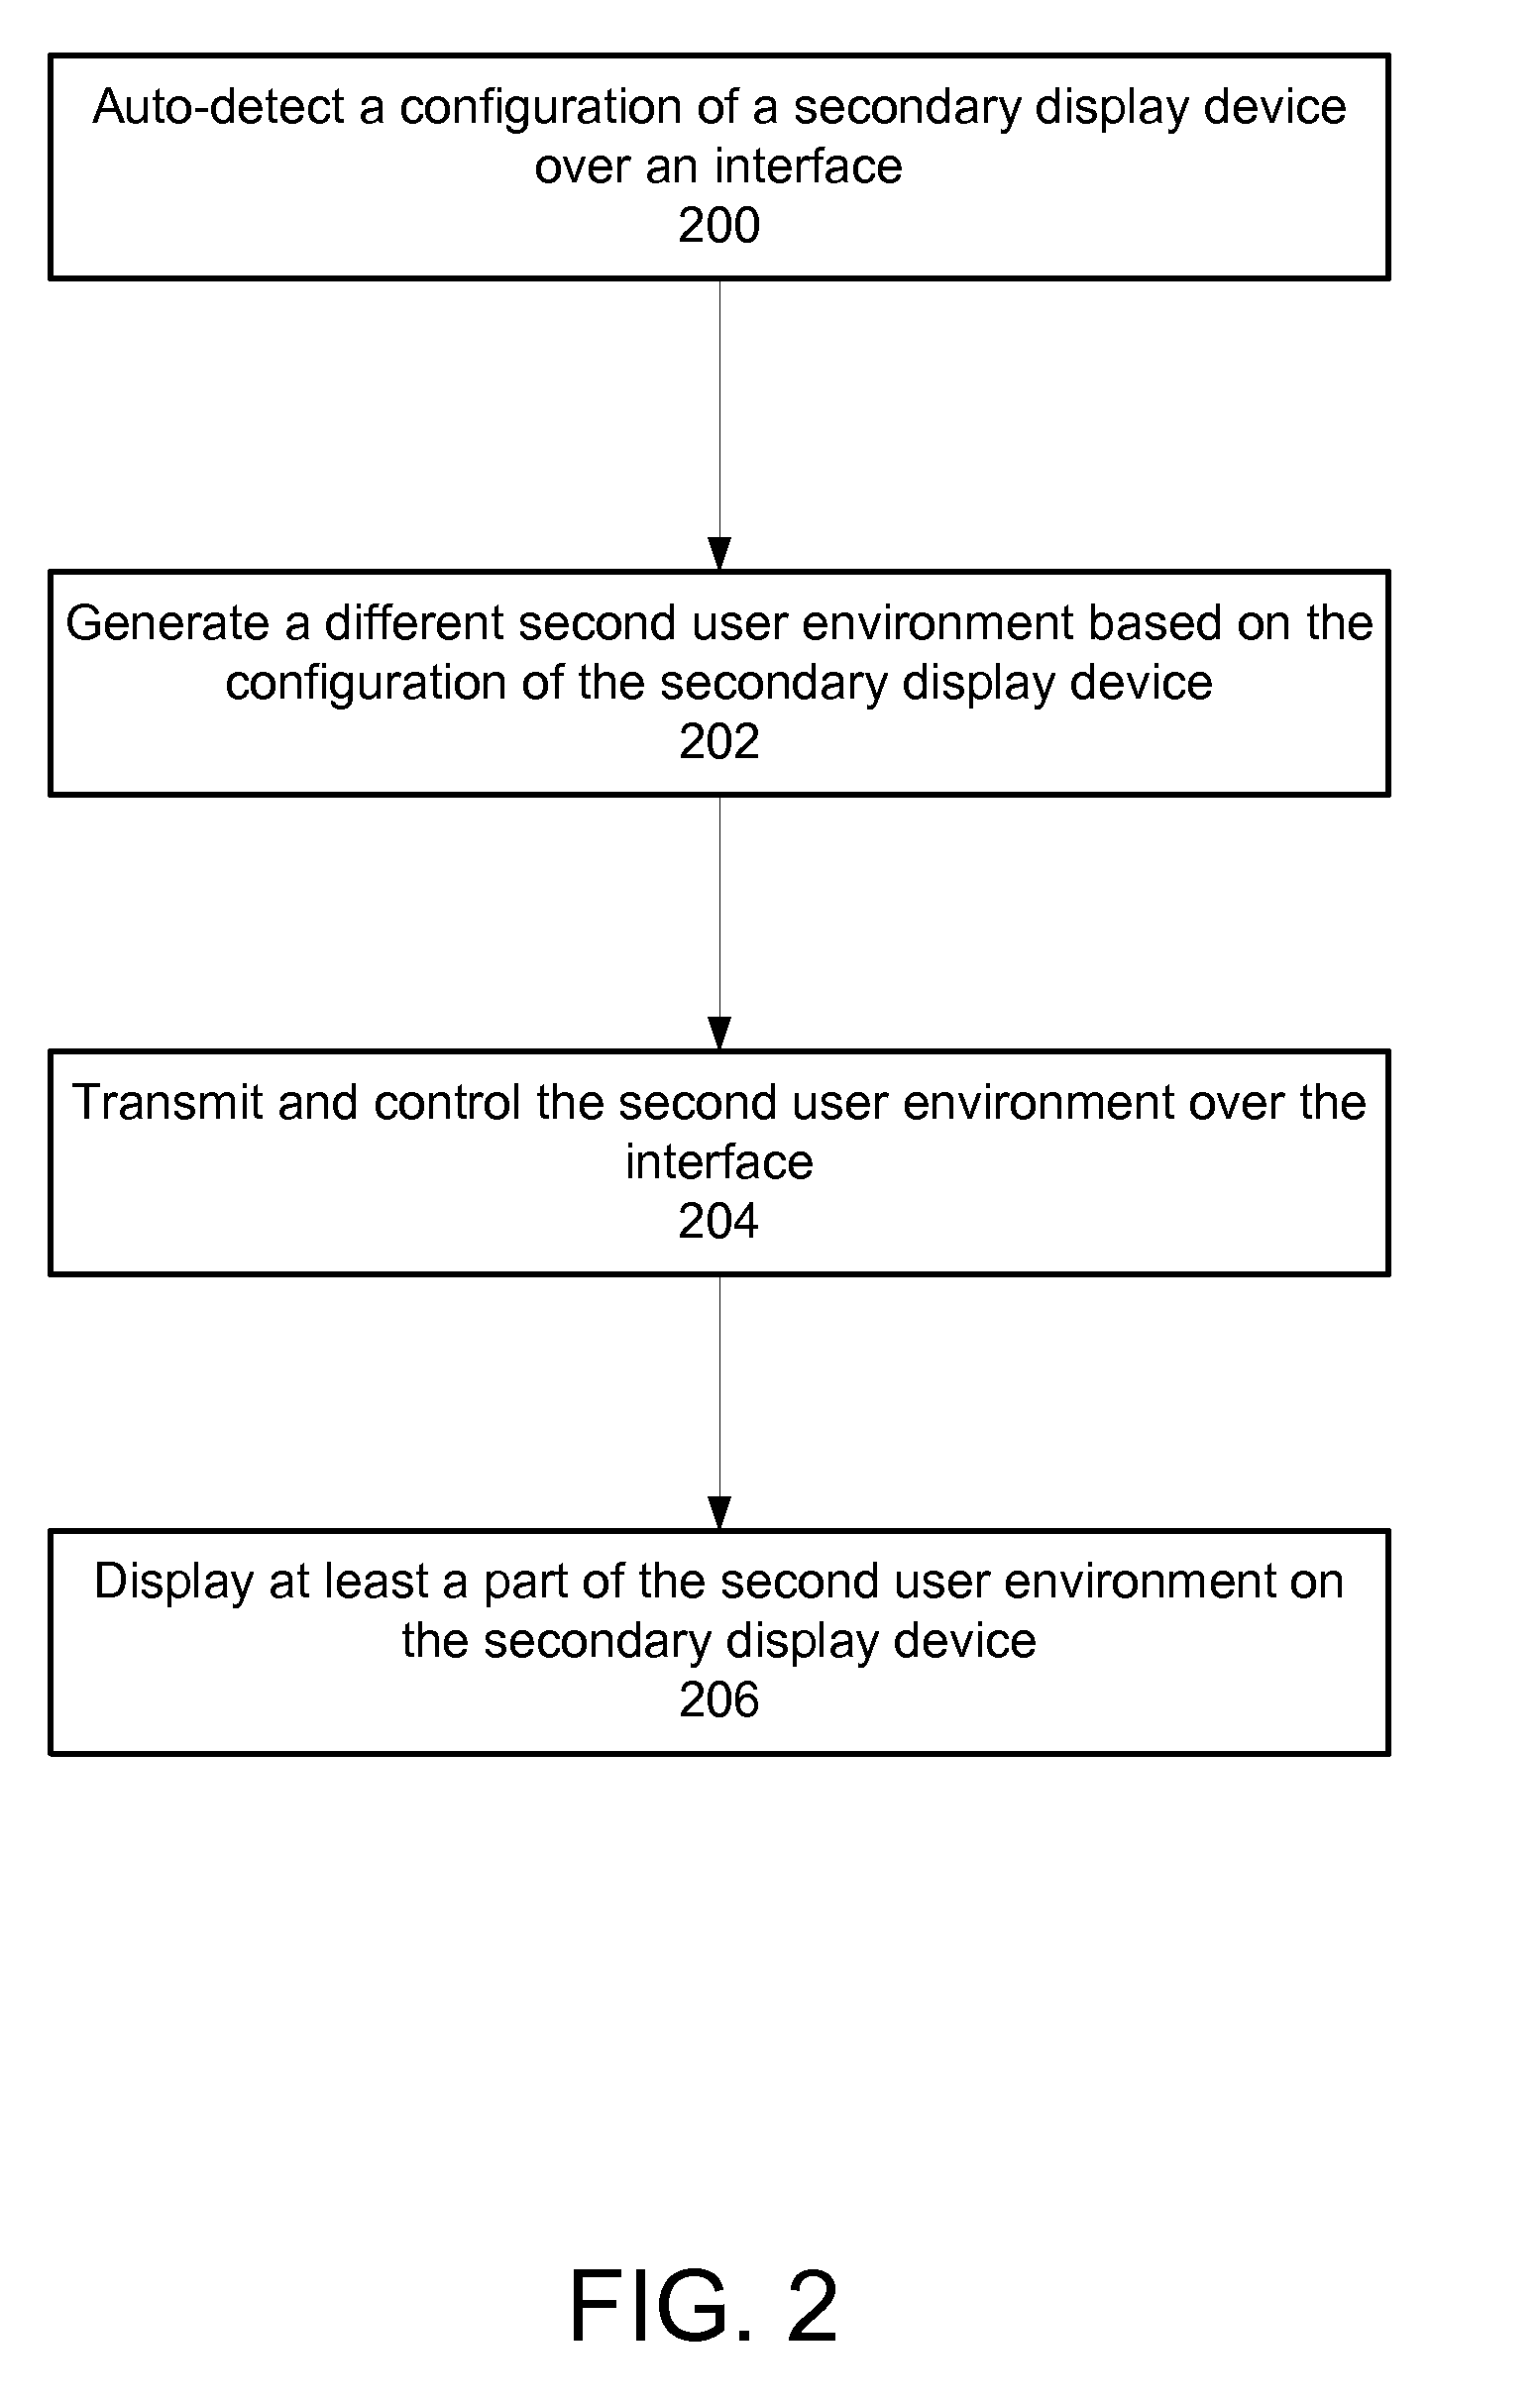 Display device for interfacing with a handheld computer device that dynamically generates a different user environment for the display device